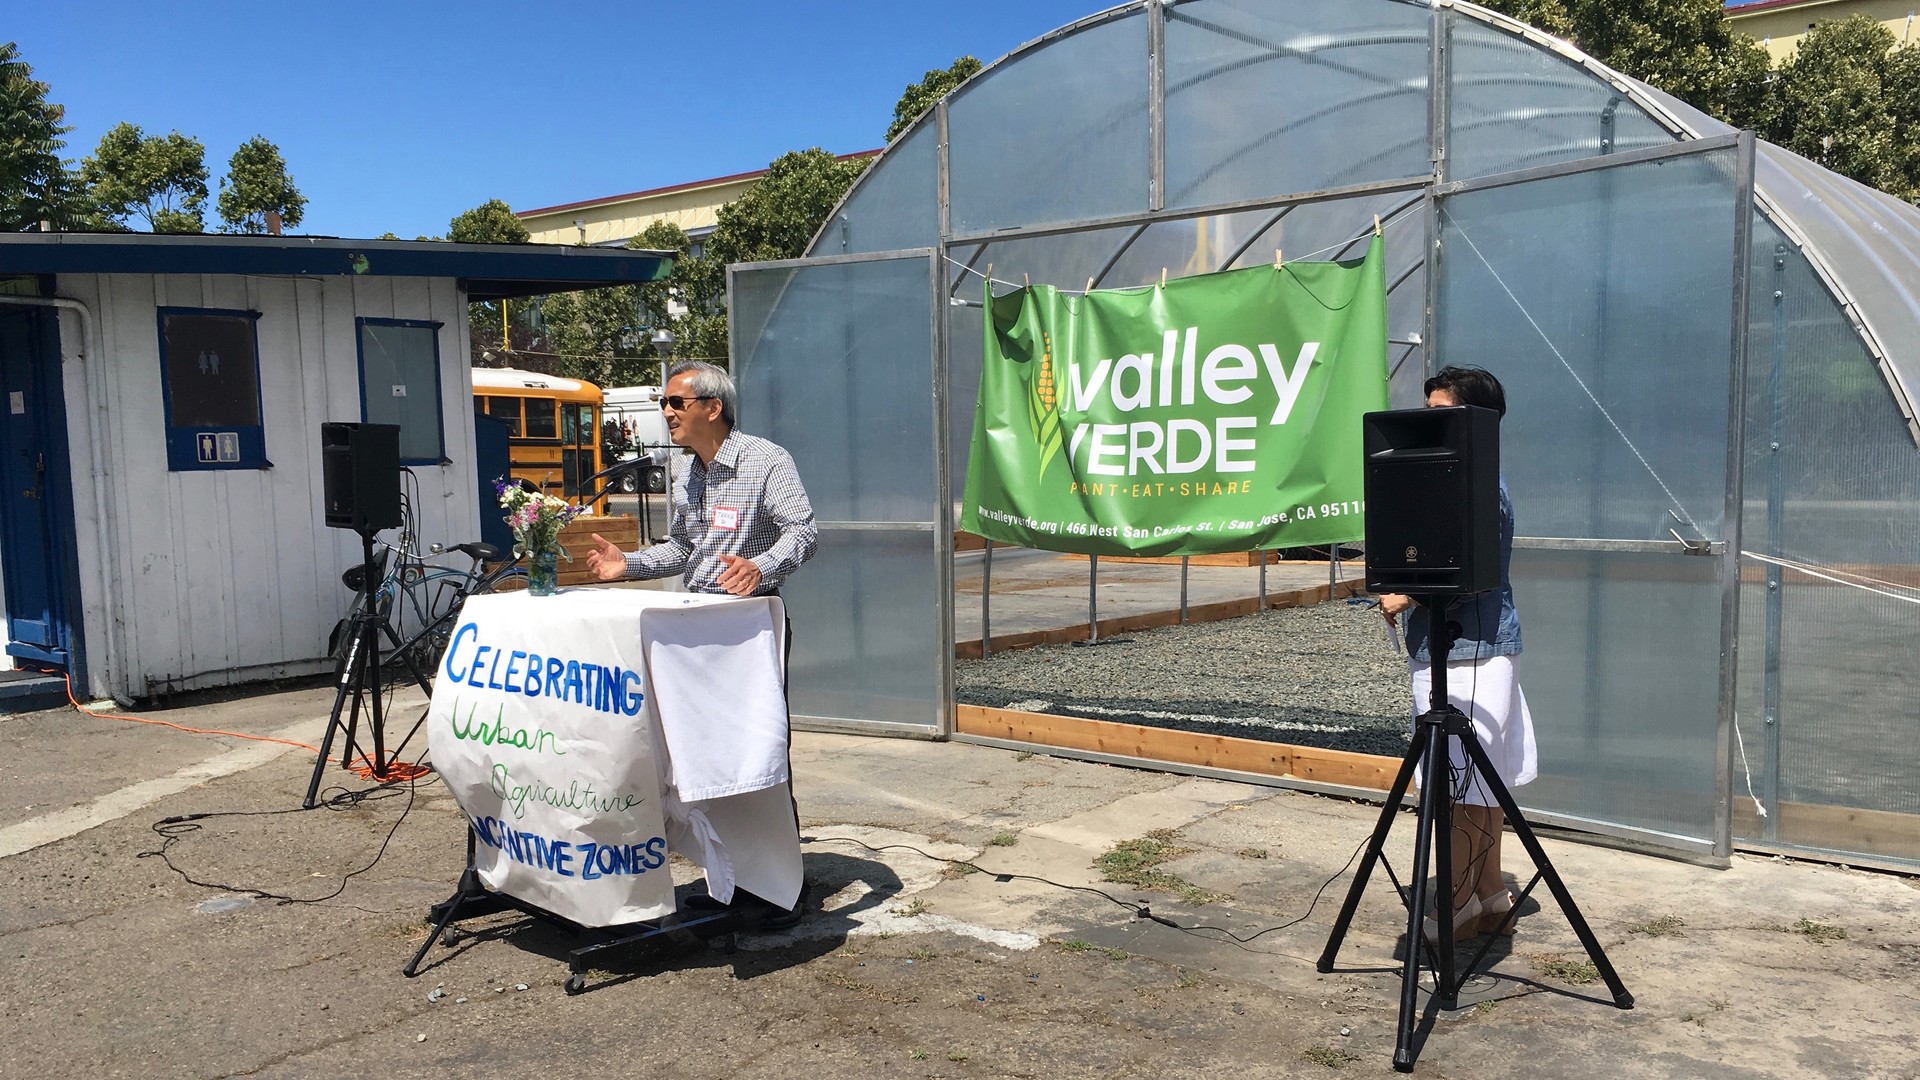 Thang Do addresses a crowd that gathered for the grand opening of the greenhouse on his property. He plans to develop after five years but is happy to let Valley Verde have the run of the place before then. Do says "At a time when national politics is so divisive, nice to see local community come together."